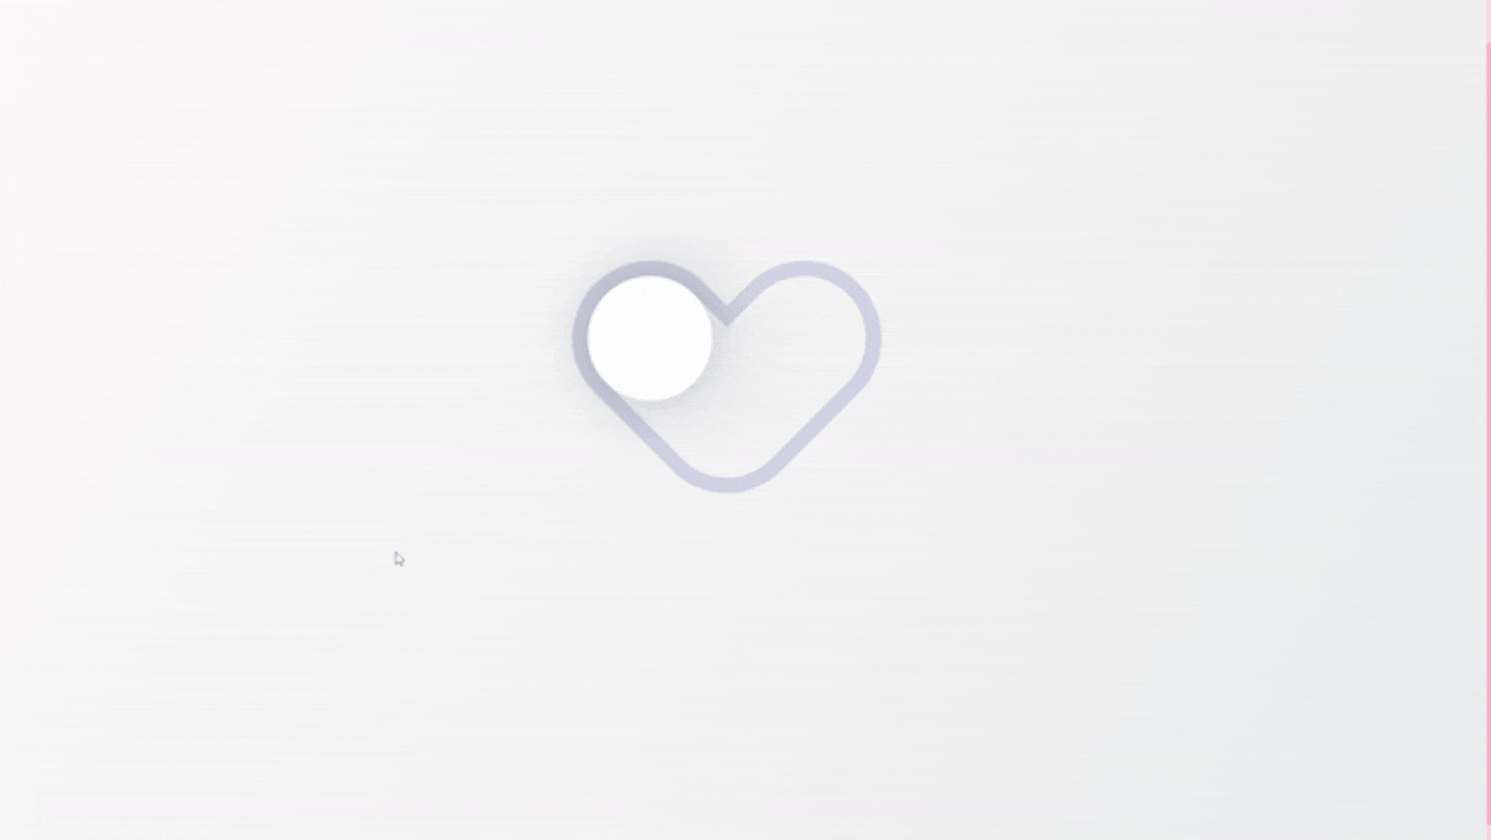 Create an Animated Heart Shape Toggle Switch with HTML and CSS